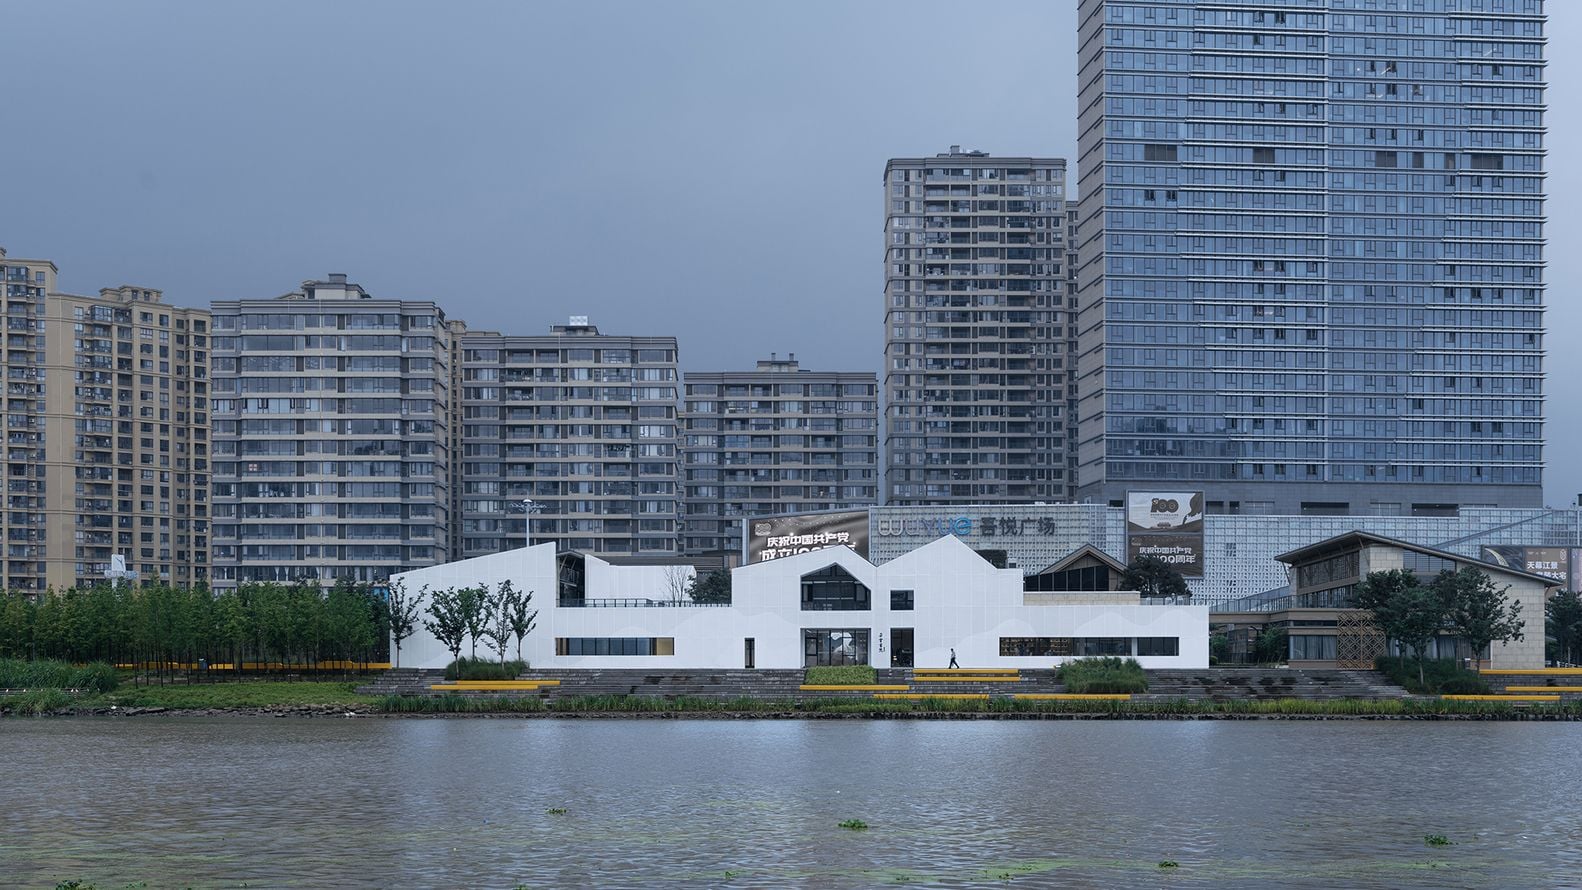 Zoomed-out view of the Duoyun bookstore alongside the region's Yongning river.